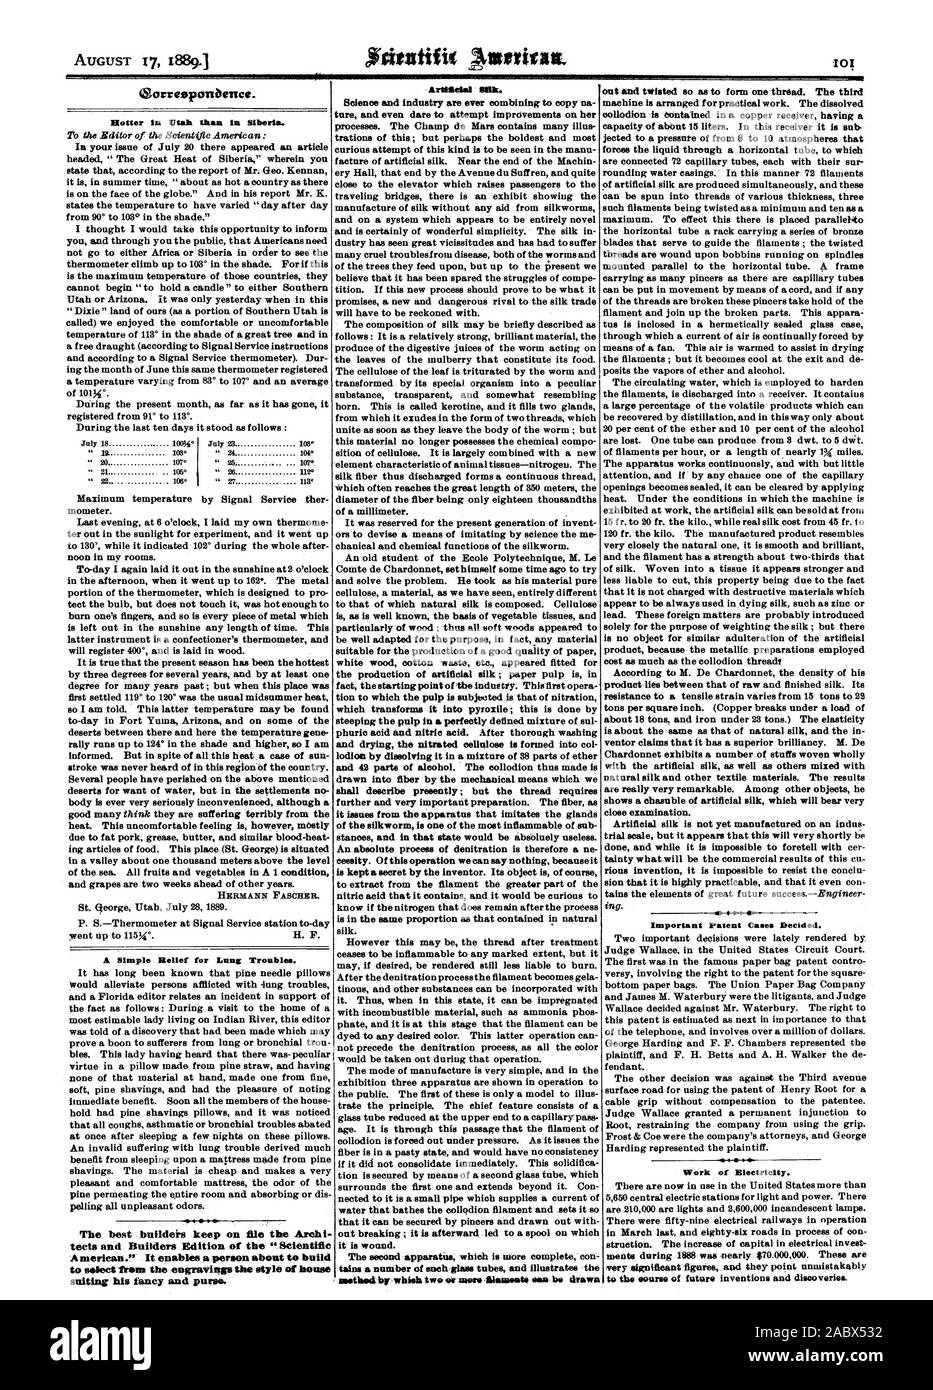 The third Important Patent Cases Decided. Work of Electricity. to the saunas of future inventions and discoveries. Oorresponbence. Hotter in Utah than in Siberia. A Simple Relief for Lung Troubles. The best builders keep on file the Archi tects and Builders Edition of the 'Scientific American.' It enables a person about to build to select from the engravings the style of house suiting his fancy and purse., 1889-08-17 Stock Photo